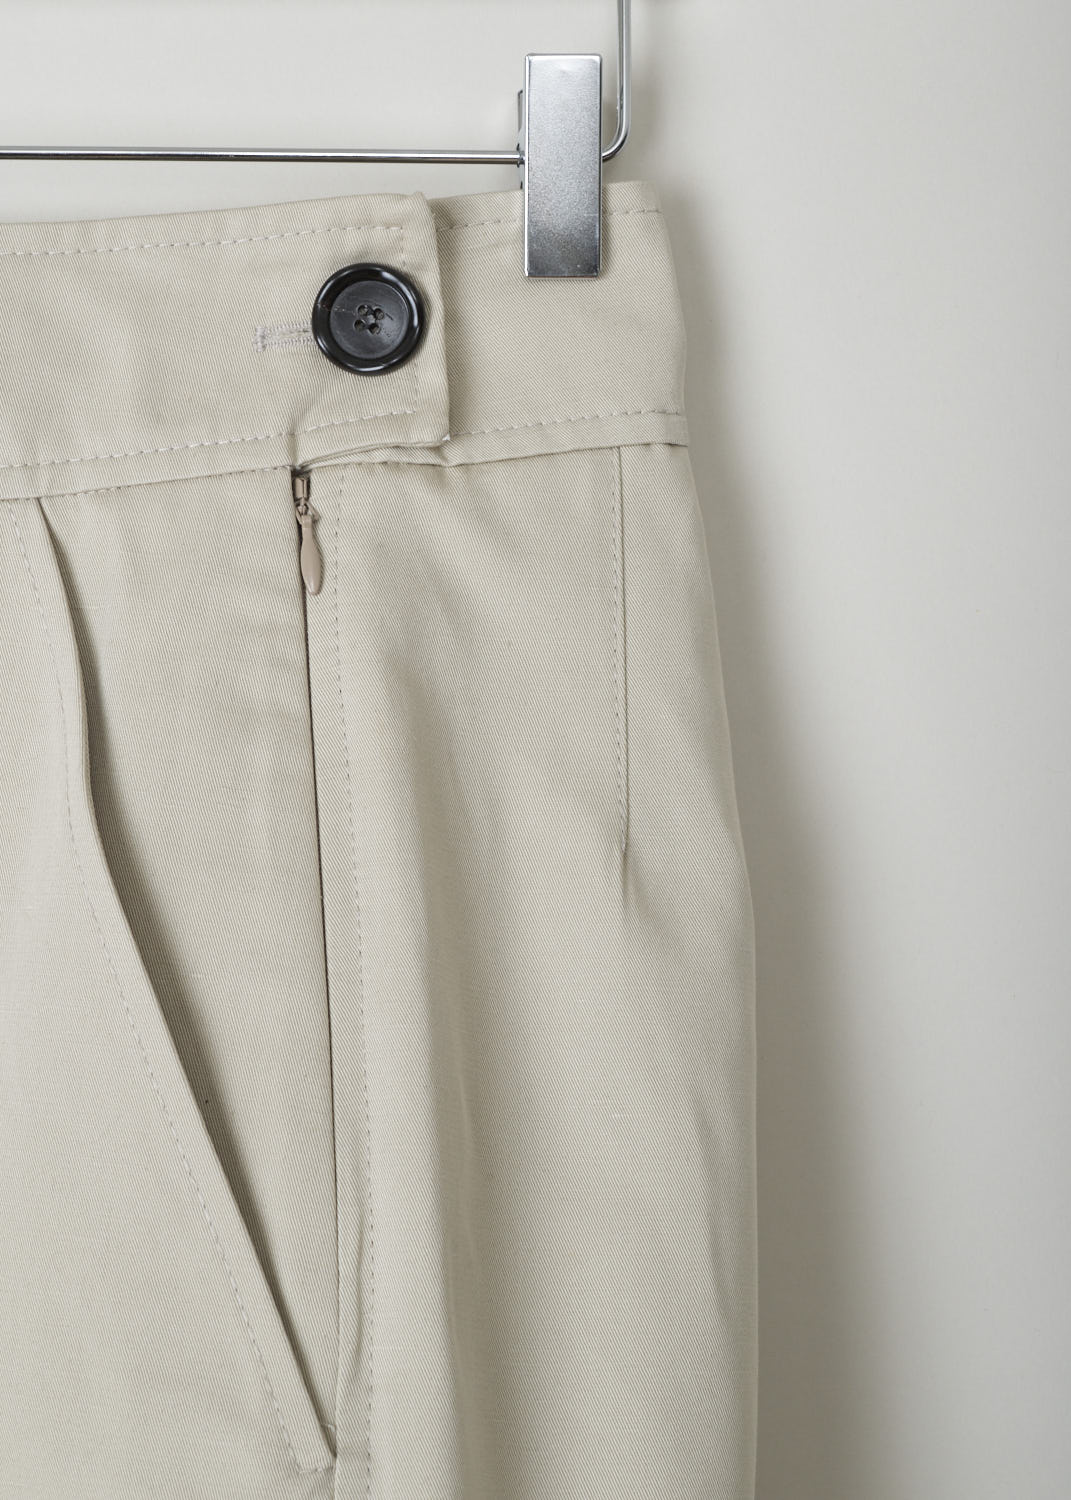 MARNI, BEIGE HIGH WAISTED SAFARI SHORTS, PAMA0151A0_TCZ35_00W20, Beige, Detail, These fun high waisted safari shorts have a broad waistband. The closure option on the model is a concealed zipper on the side, as well as a single black button. On either side, a slanted pocket can be found. A single welt pocket with button can be found in the back. These shorts have a folded over hem.
